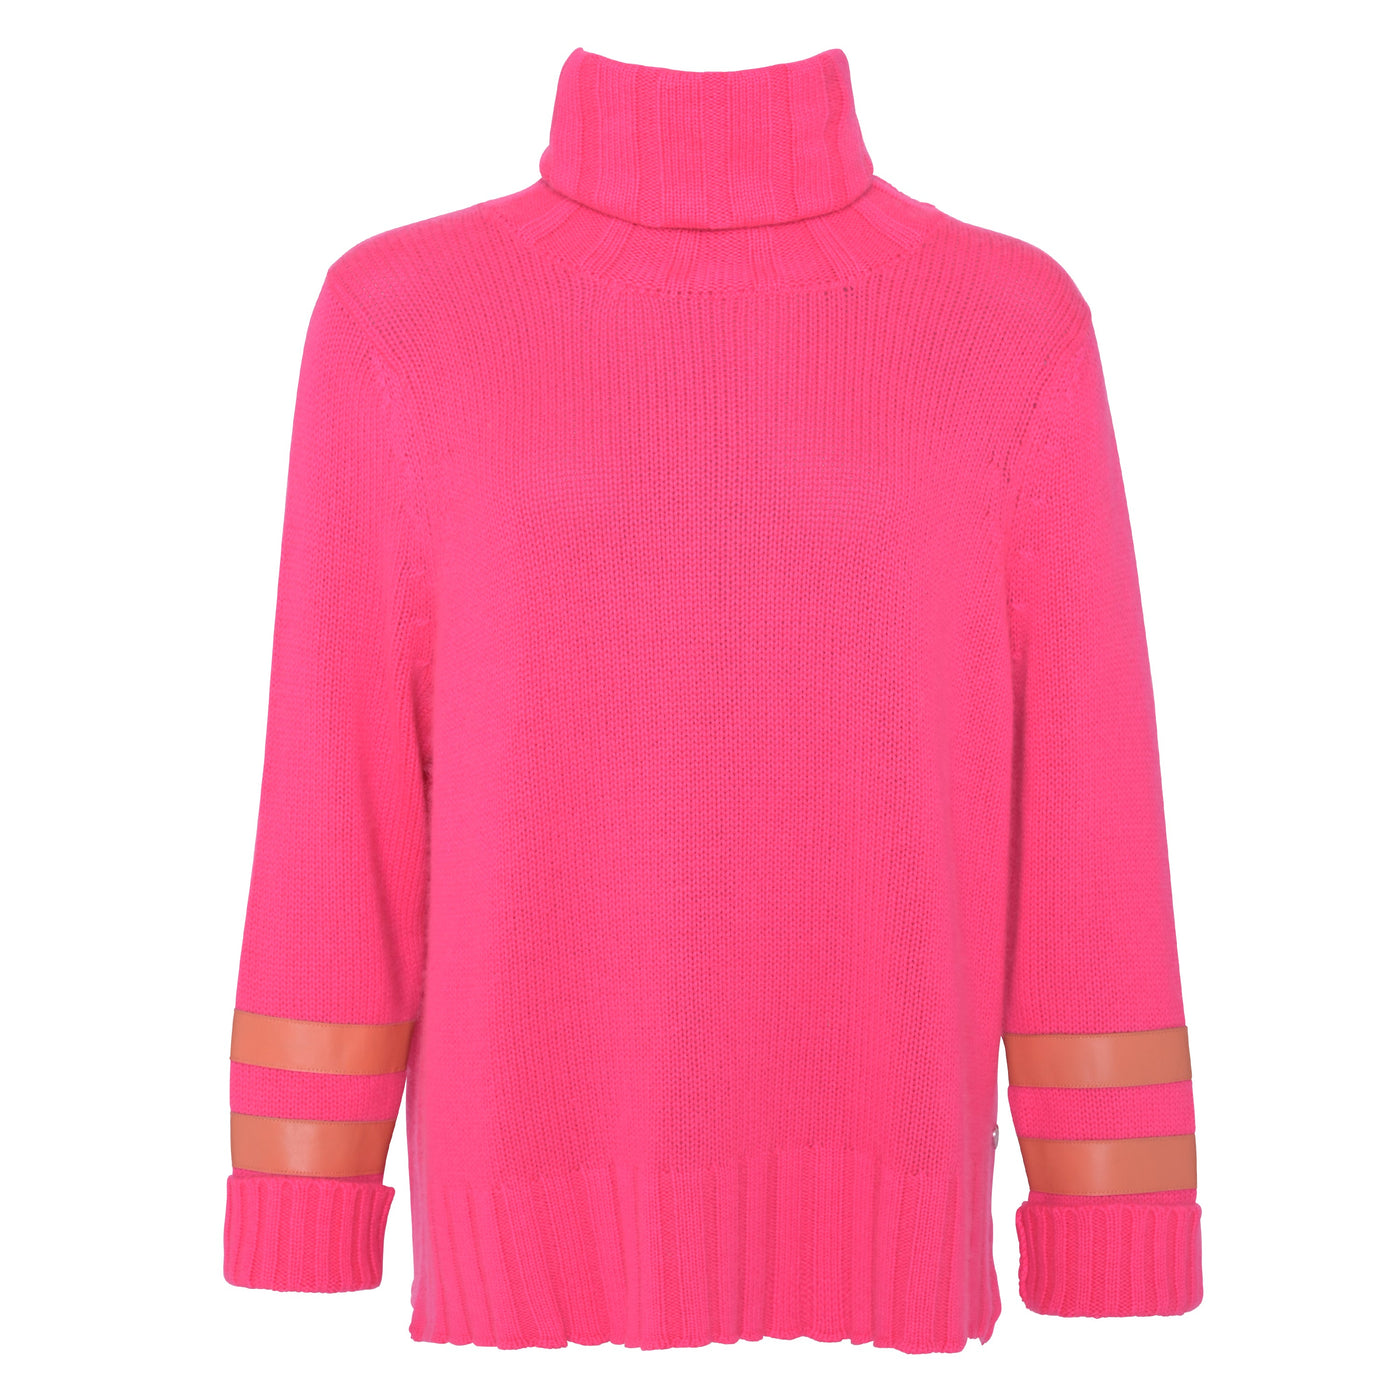 Pullover Elodie-cs mit Fake-Leather Applikation in Flamingo